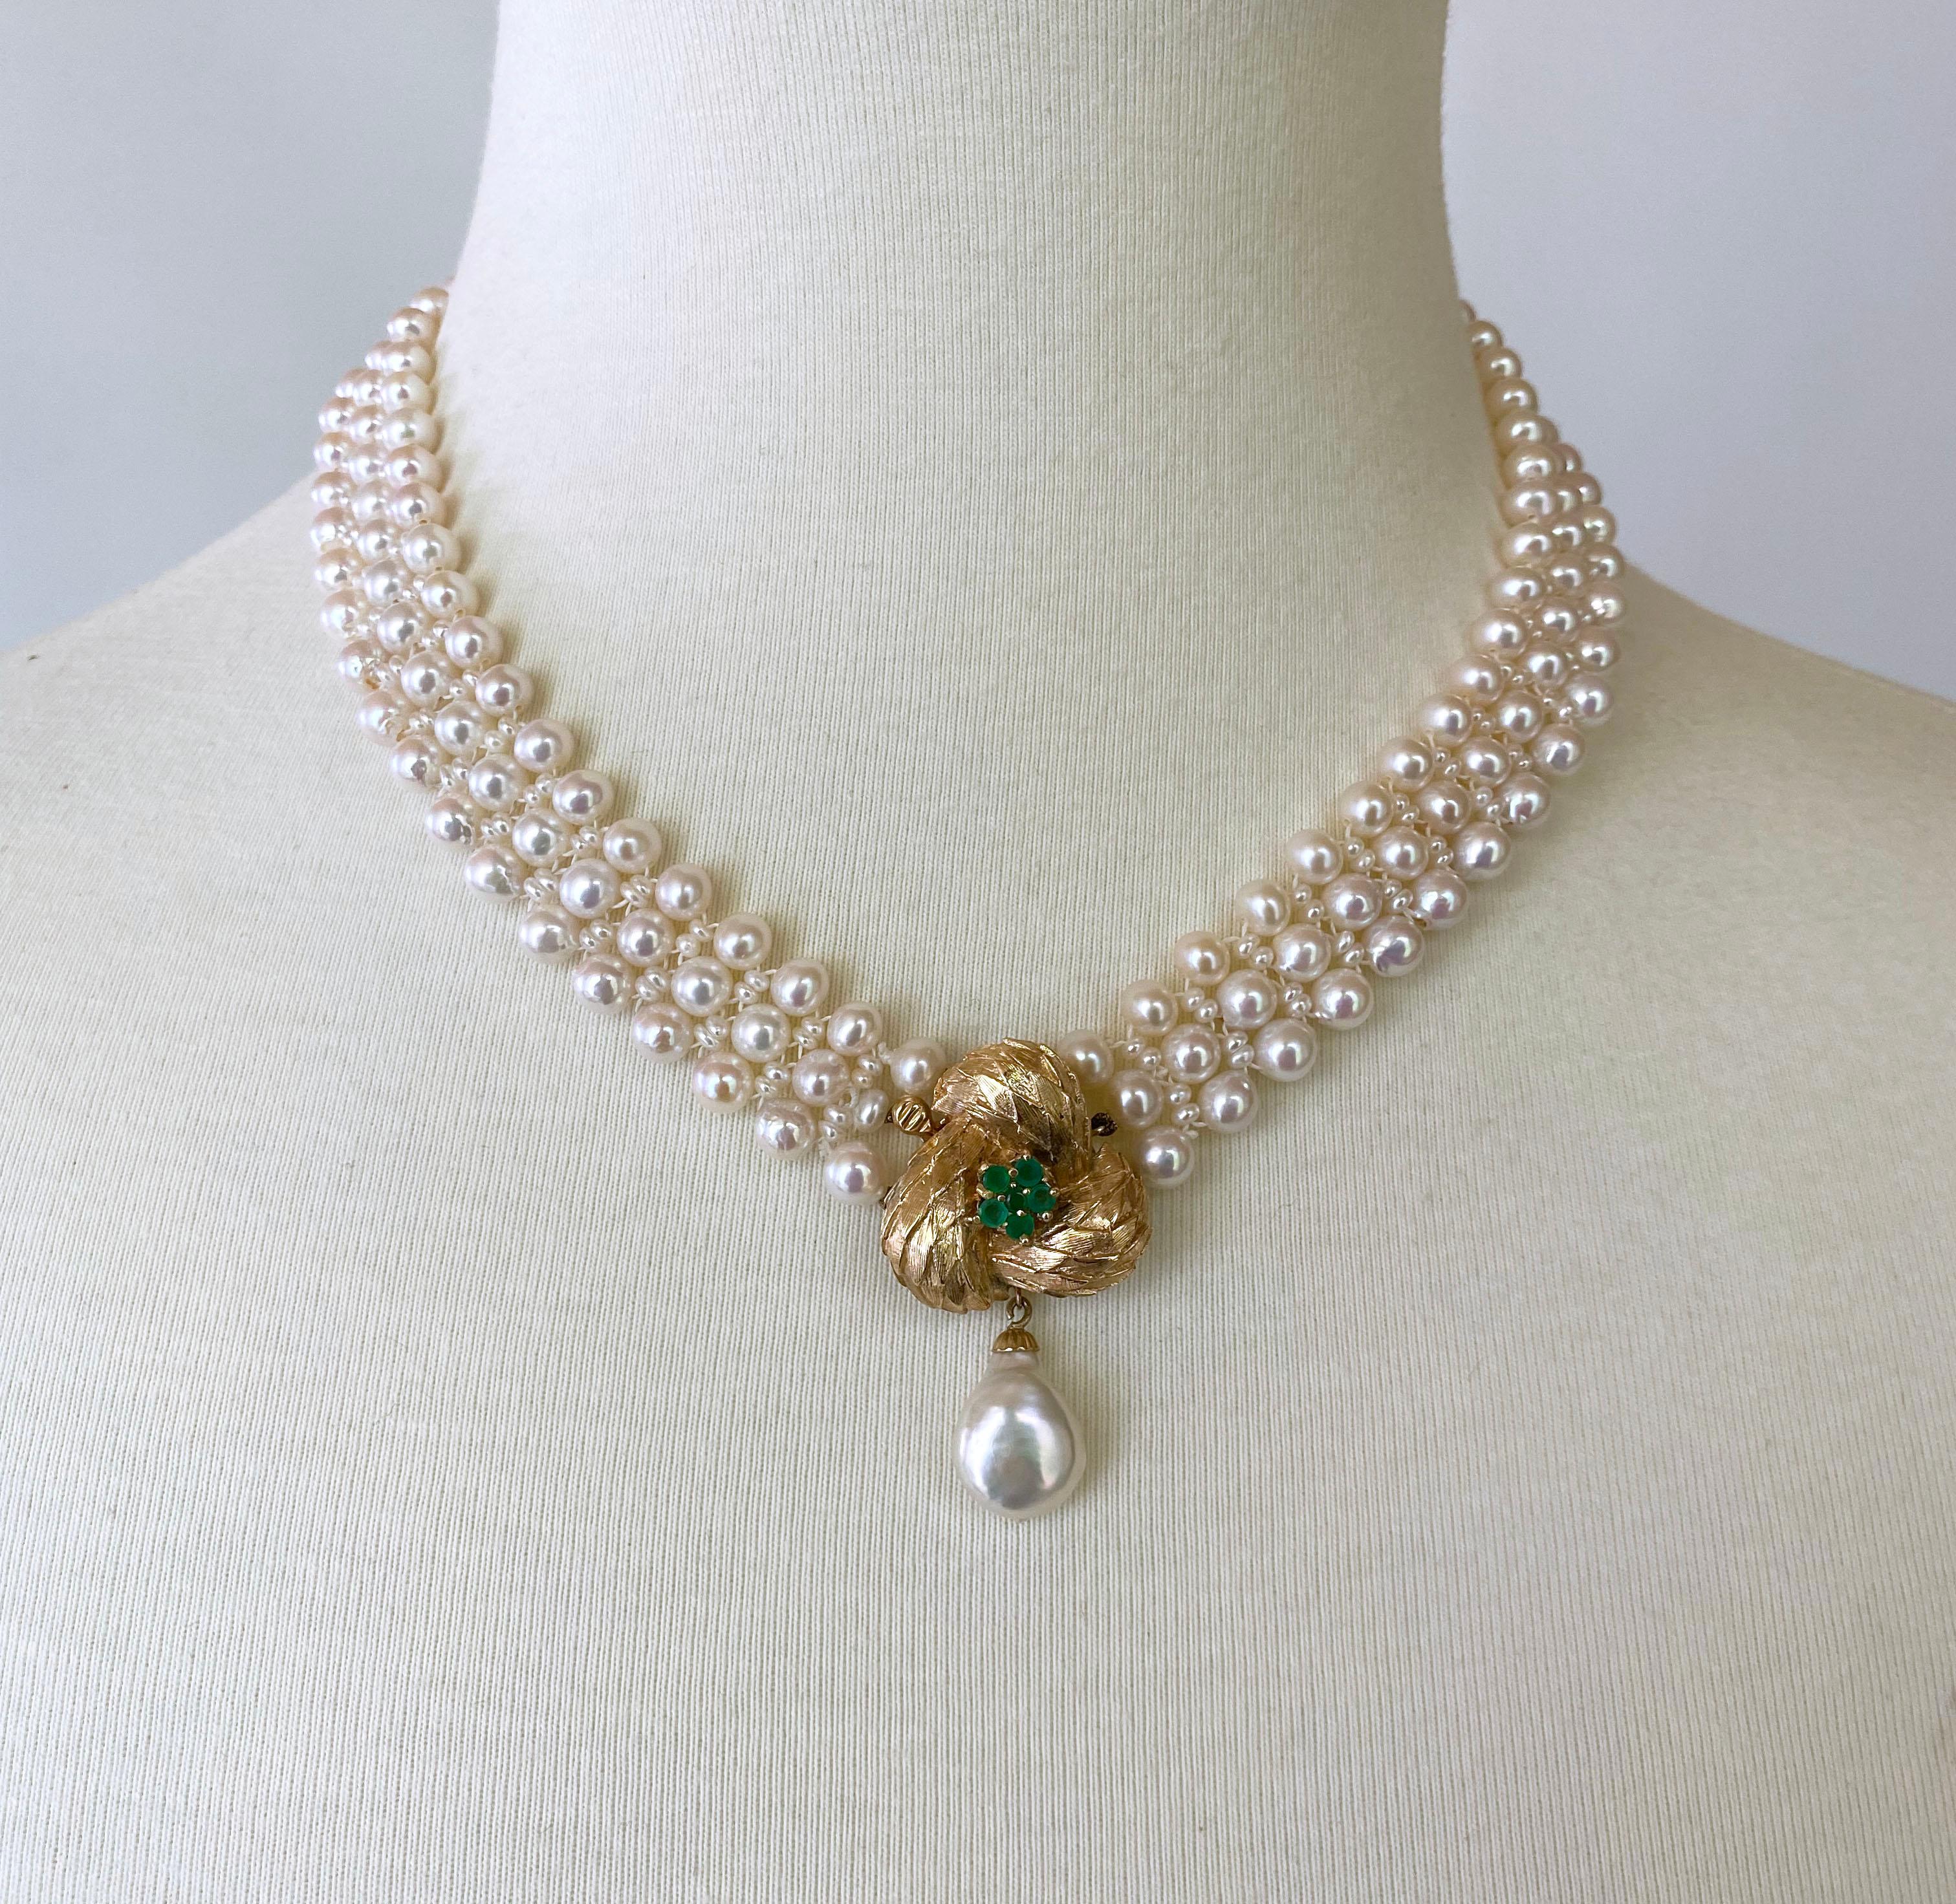 Marina J. Pearl Necklace with Vintage 14k Yellow Gold and Emerald Center-Clasp In New Condition For Sale In Los Angeles, CA